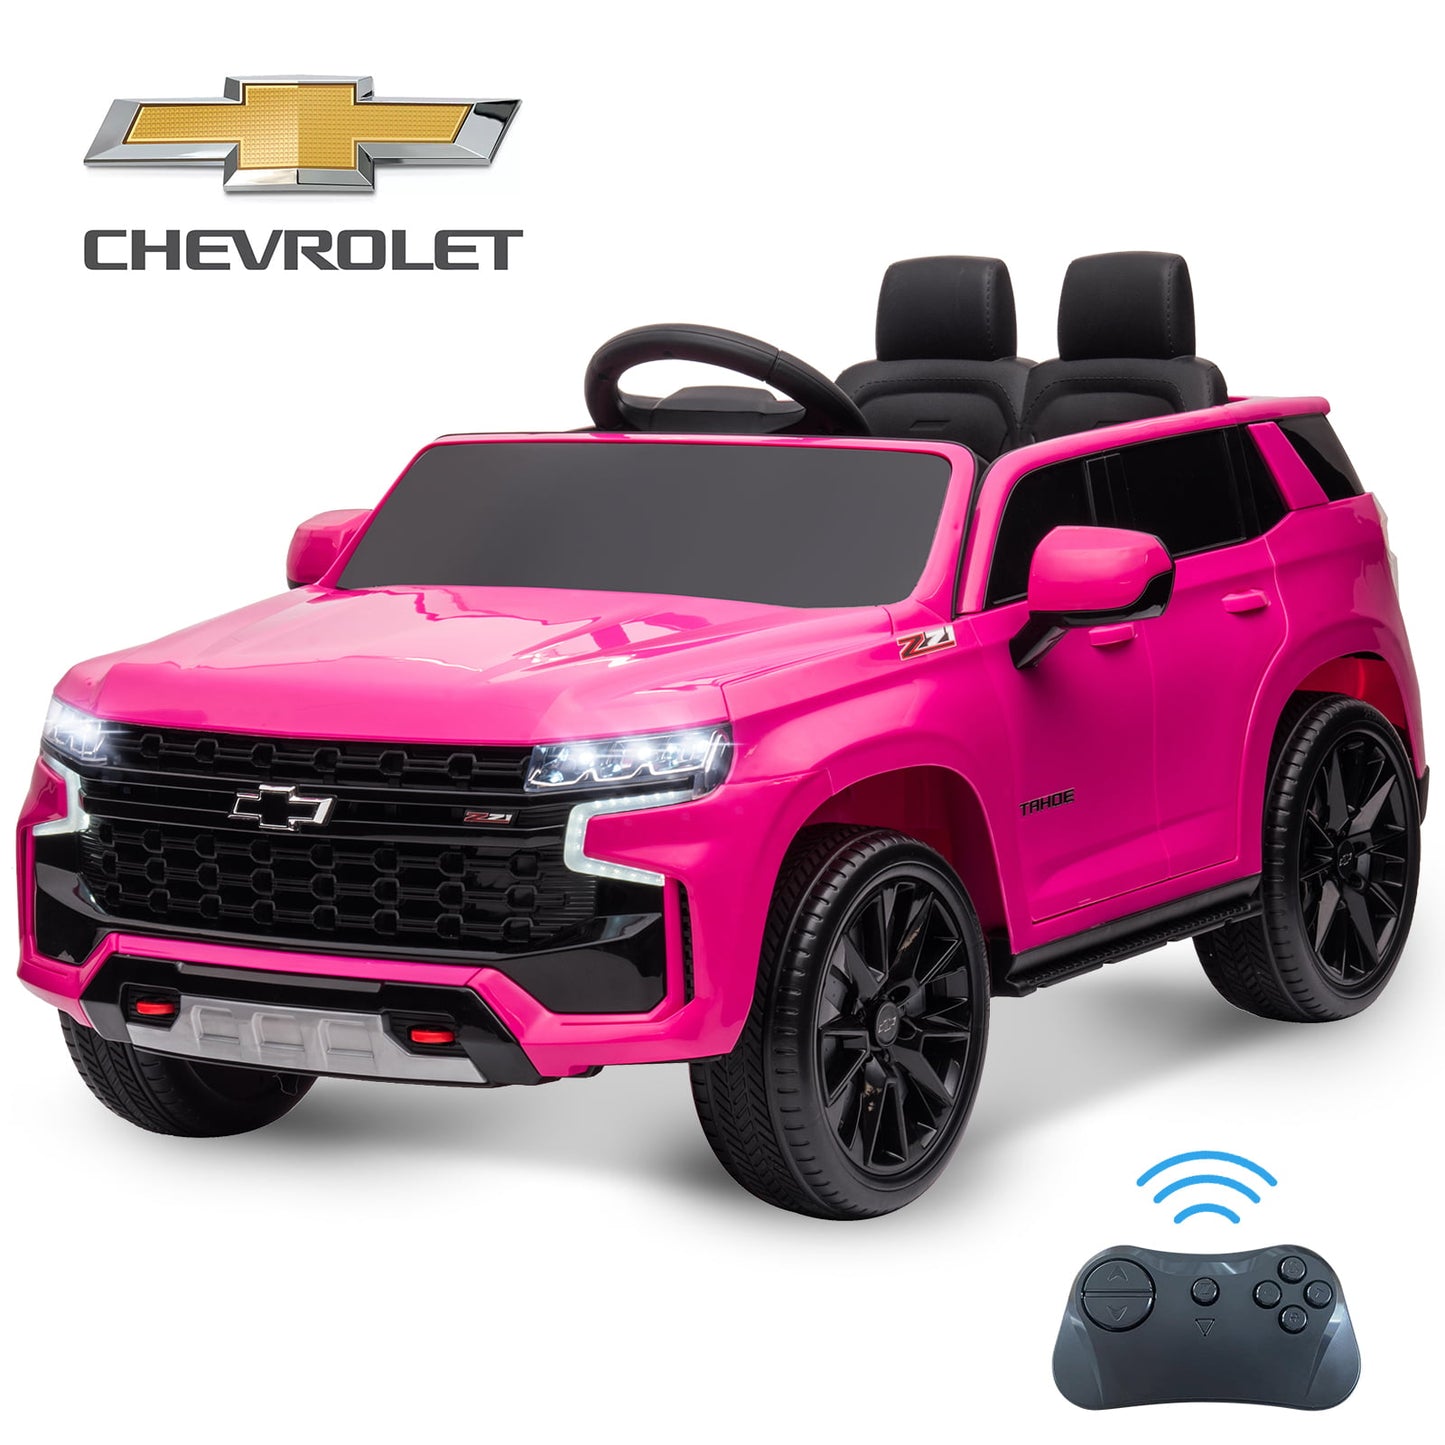 Toyota Tacoma 12 V Powered Ride on Cars with Remote Control, Ride on Toys with LED Lights, MP3 Player, Battery Operated Riding Toys for Boys Girls Kids Birthday Gift, Black